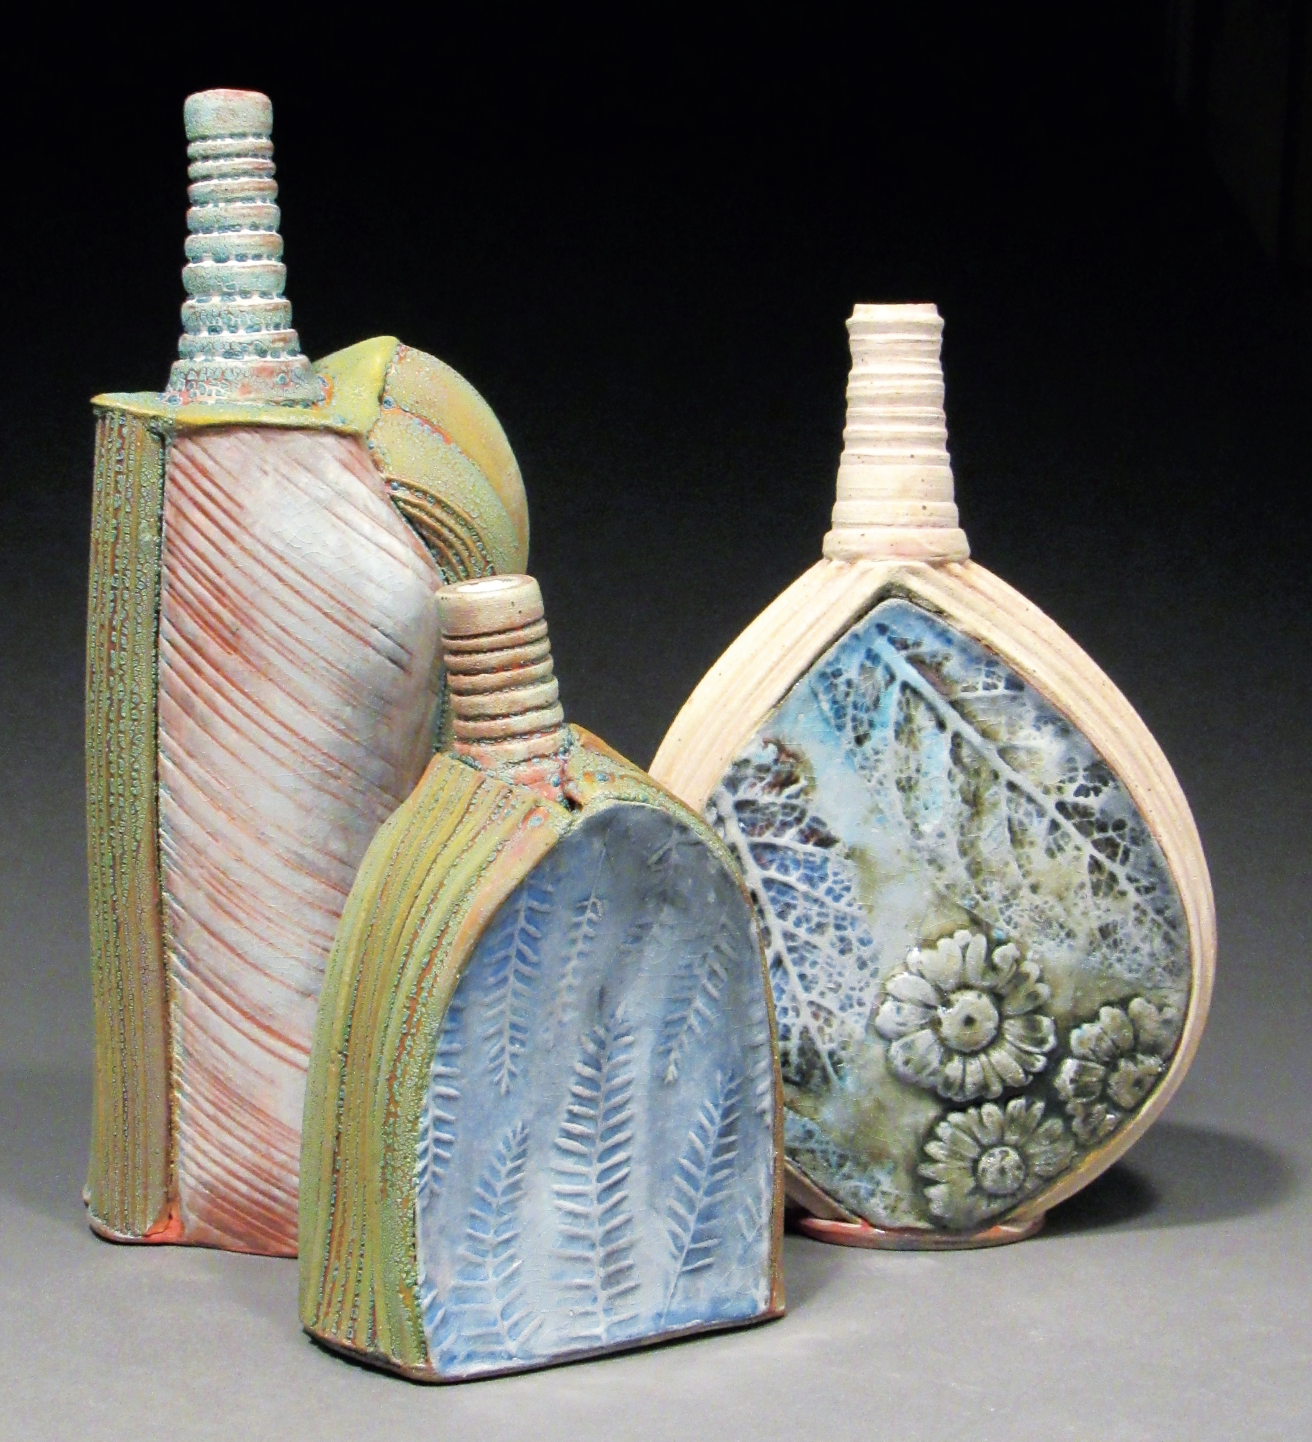 David Scott Smith’s bottles, wheel-thrown, extruded, and press-molded clay components, decorated with underglaze washes and low-fire glazes, and fired in a low-fire wood kiln (converted from an electric kiln) to cone 1.